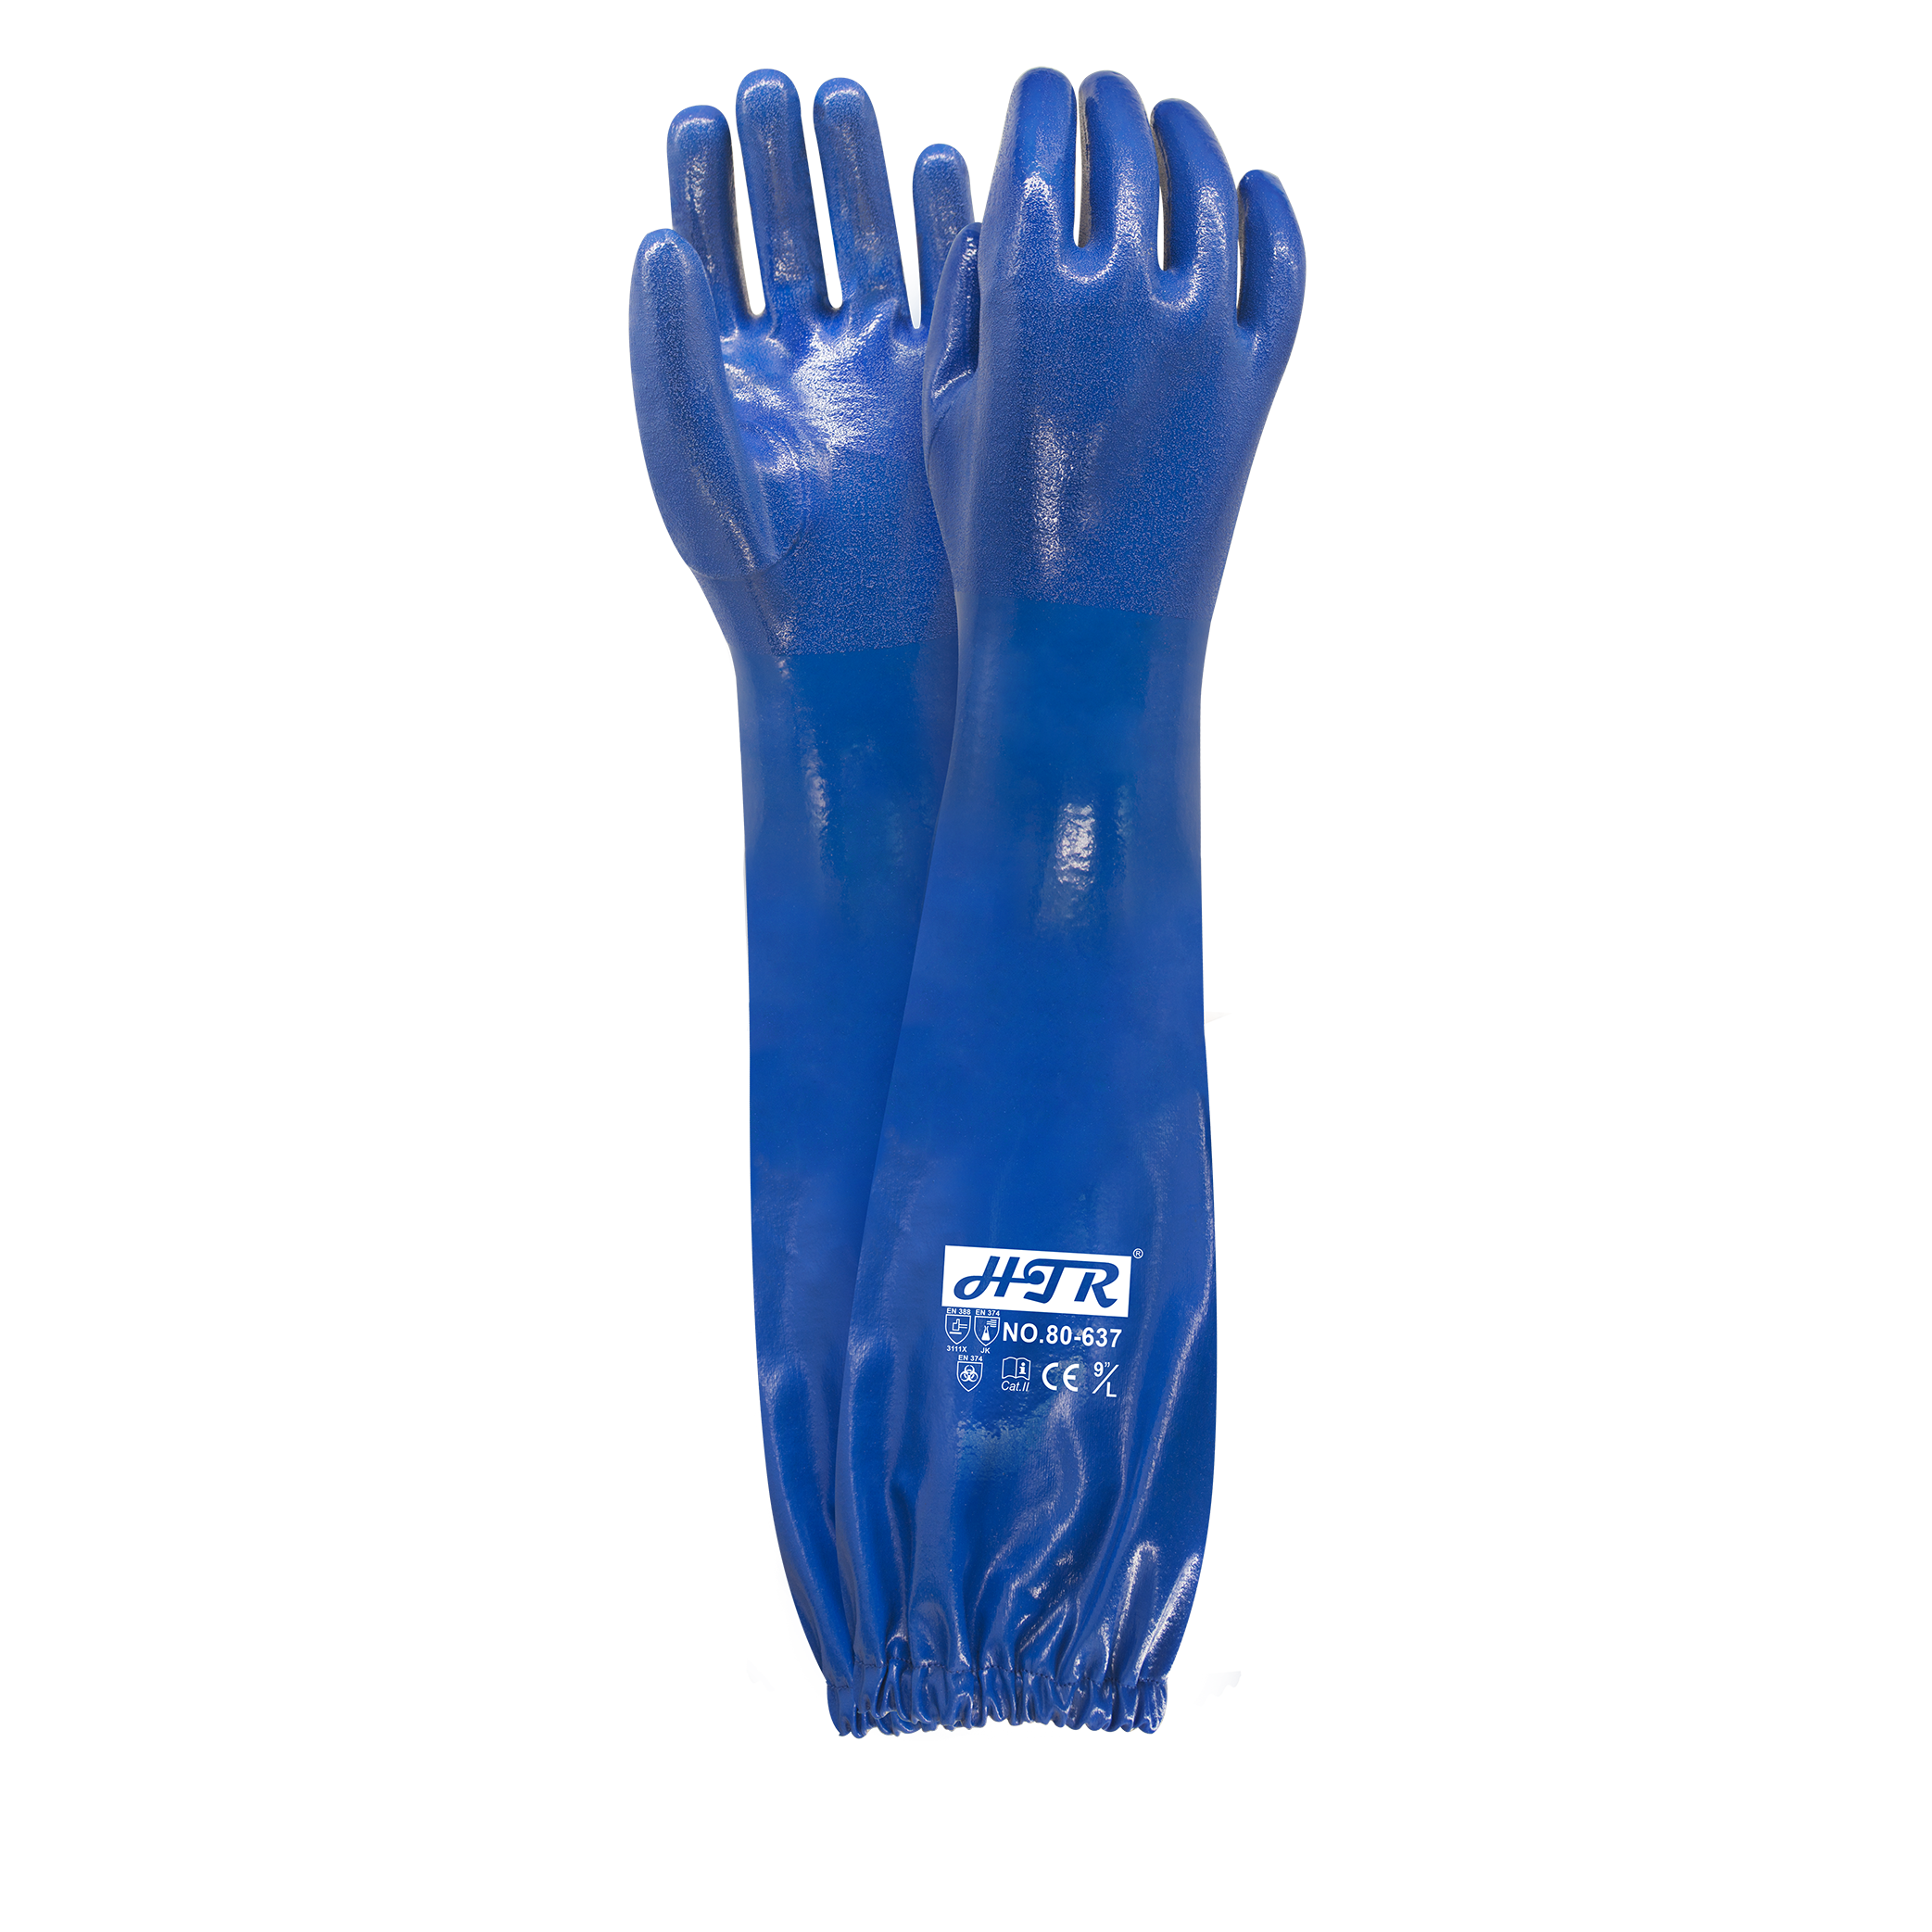 Nitrile safety sleeve chemical resistant gloves